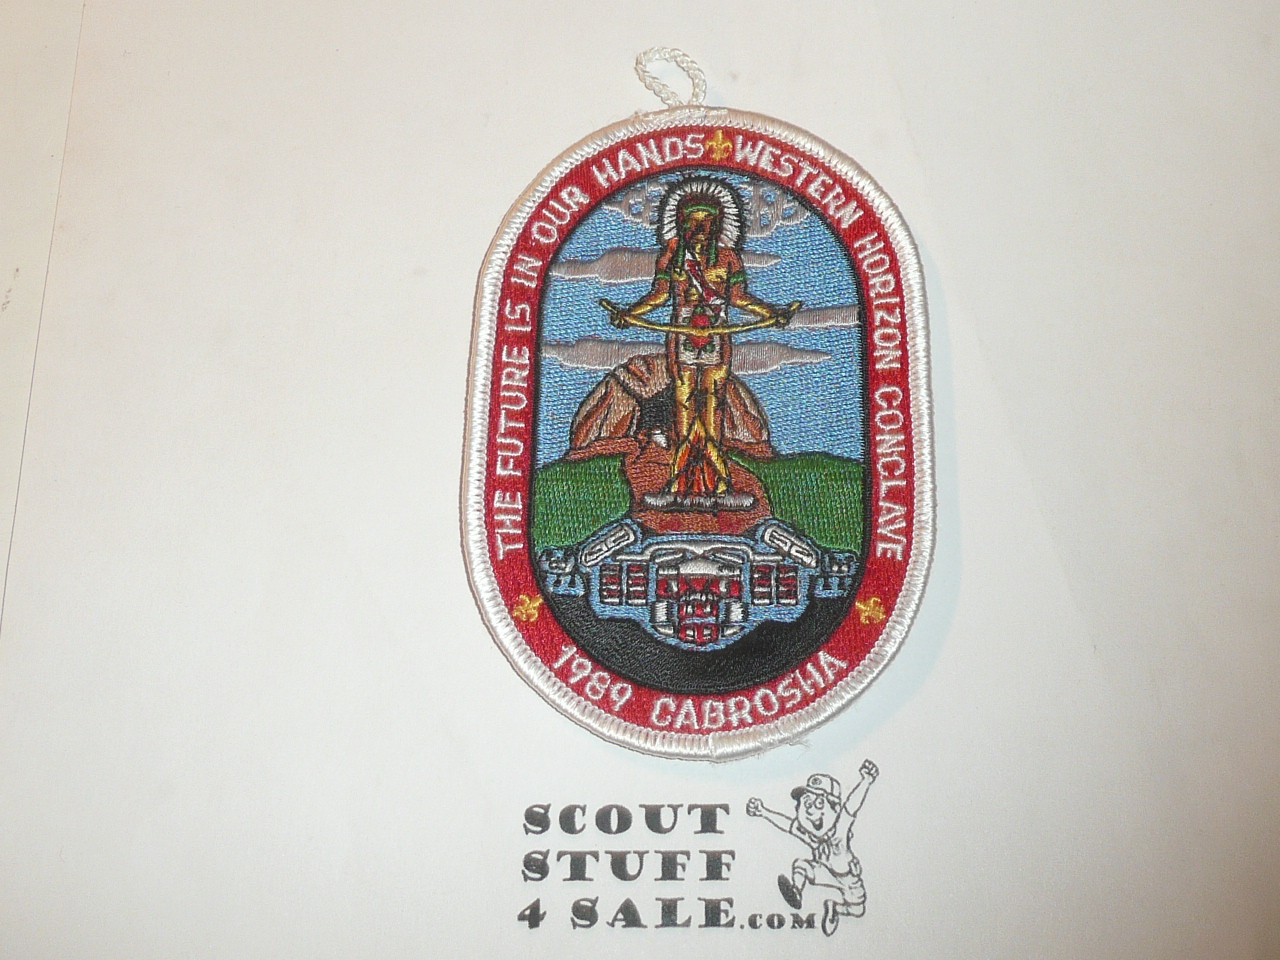 Section W3B 1989 O.A. Conclave Patch with button loop - Scout